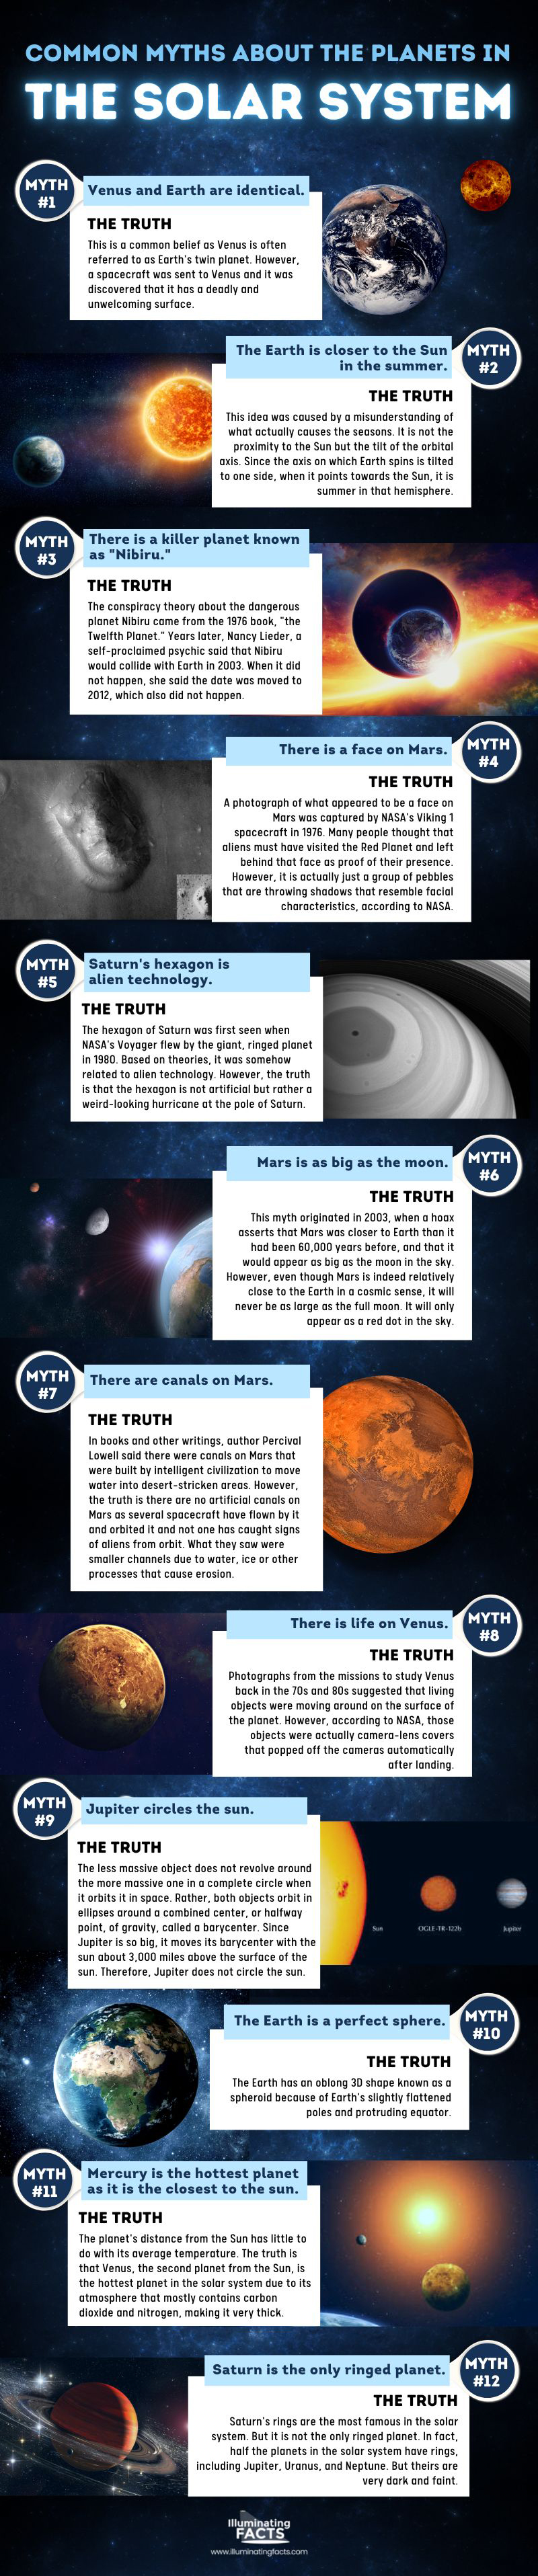 COMMON MYTHS ABOUT THE PLANETS IN THE SOLAR SYSTEM